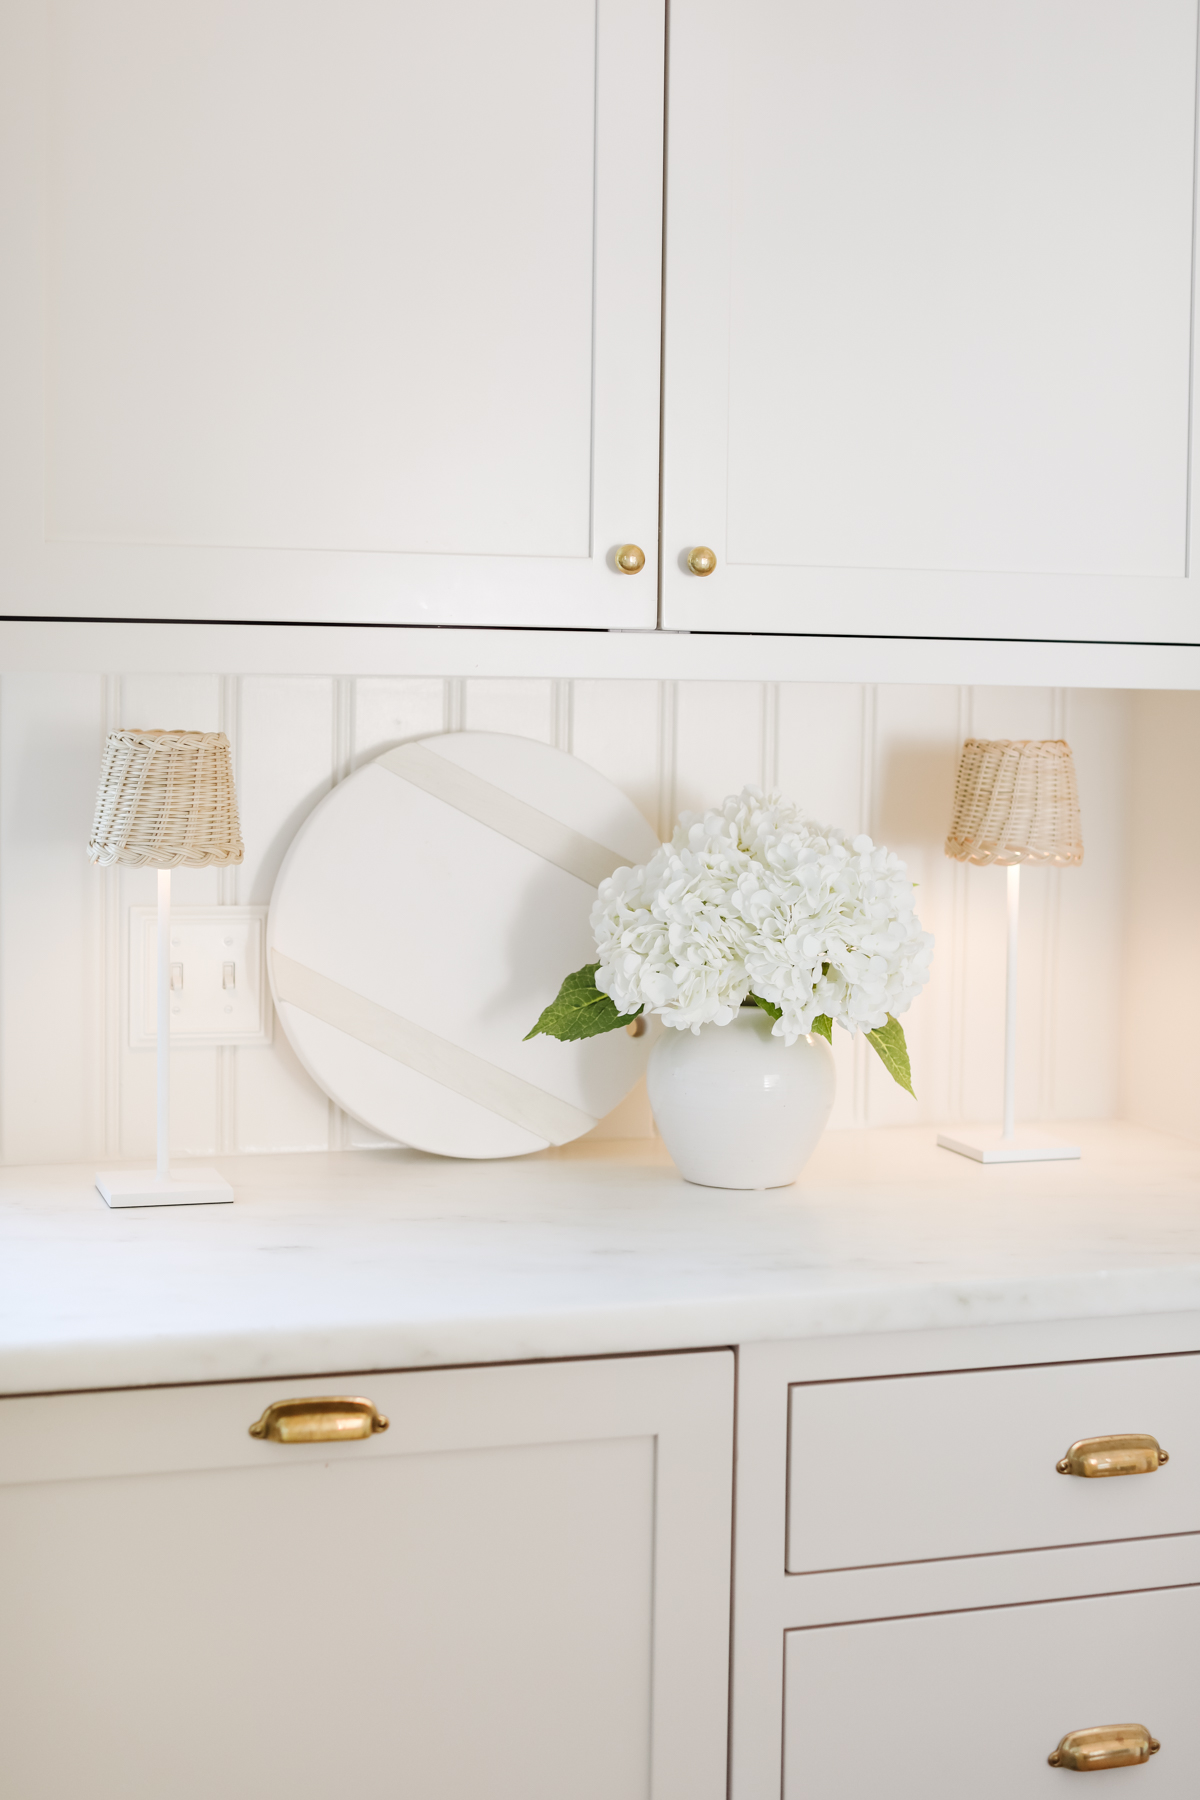 A white kitchen with custom kitchen cabinets and a vase of flowers.